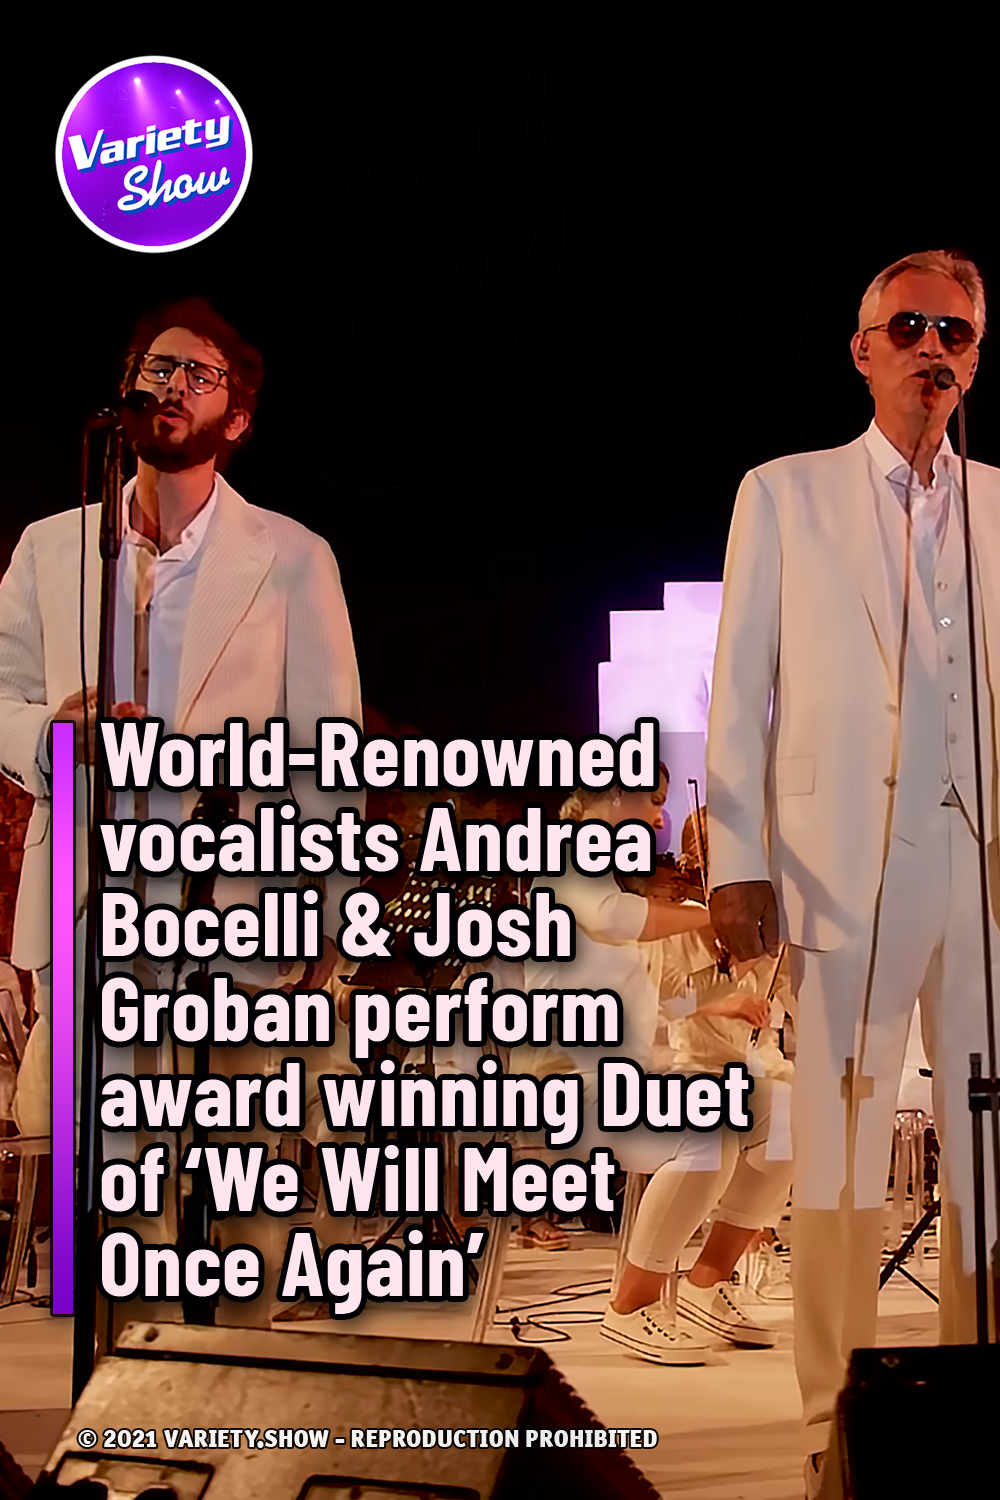 World-Renowned vocalists Andrea Bocelli & Josh Groban perform award winning Duet of ‘We Will Meet Once Again’